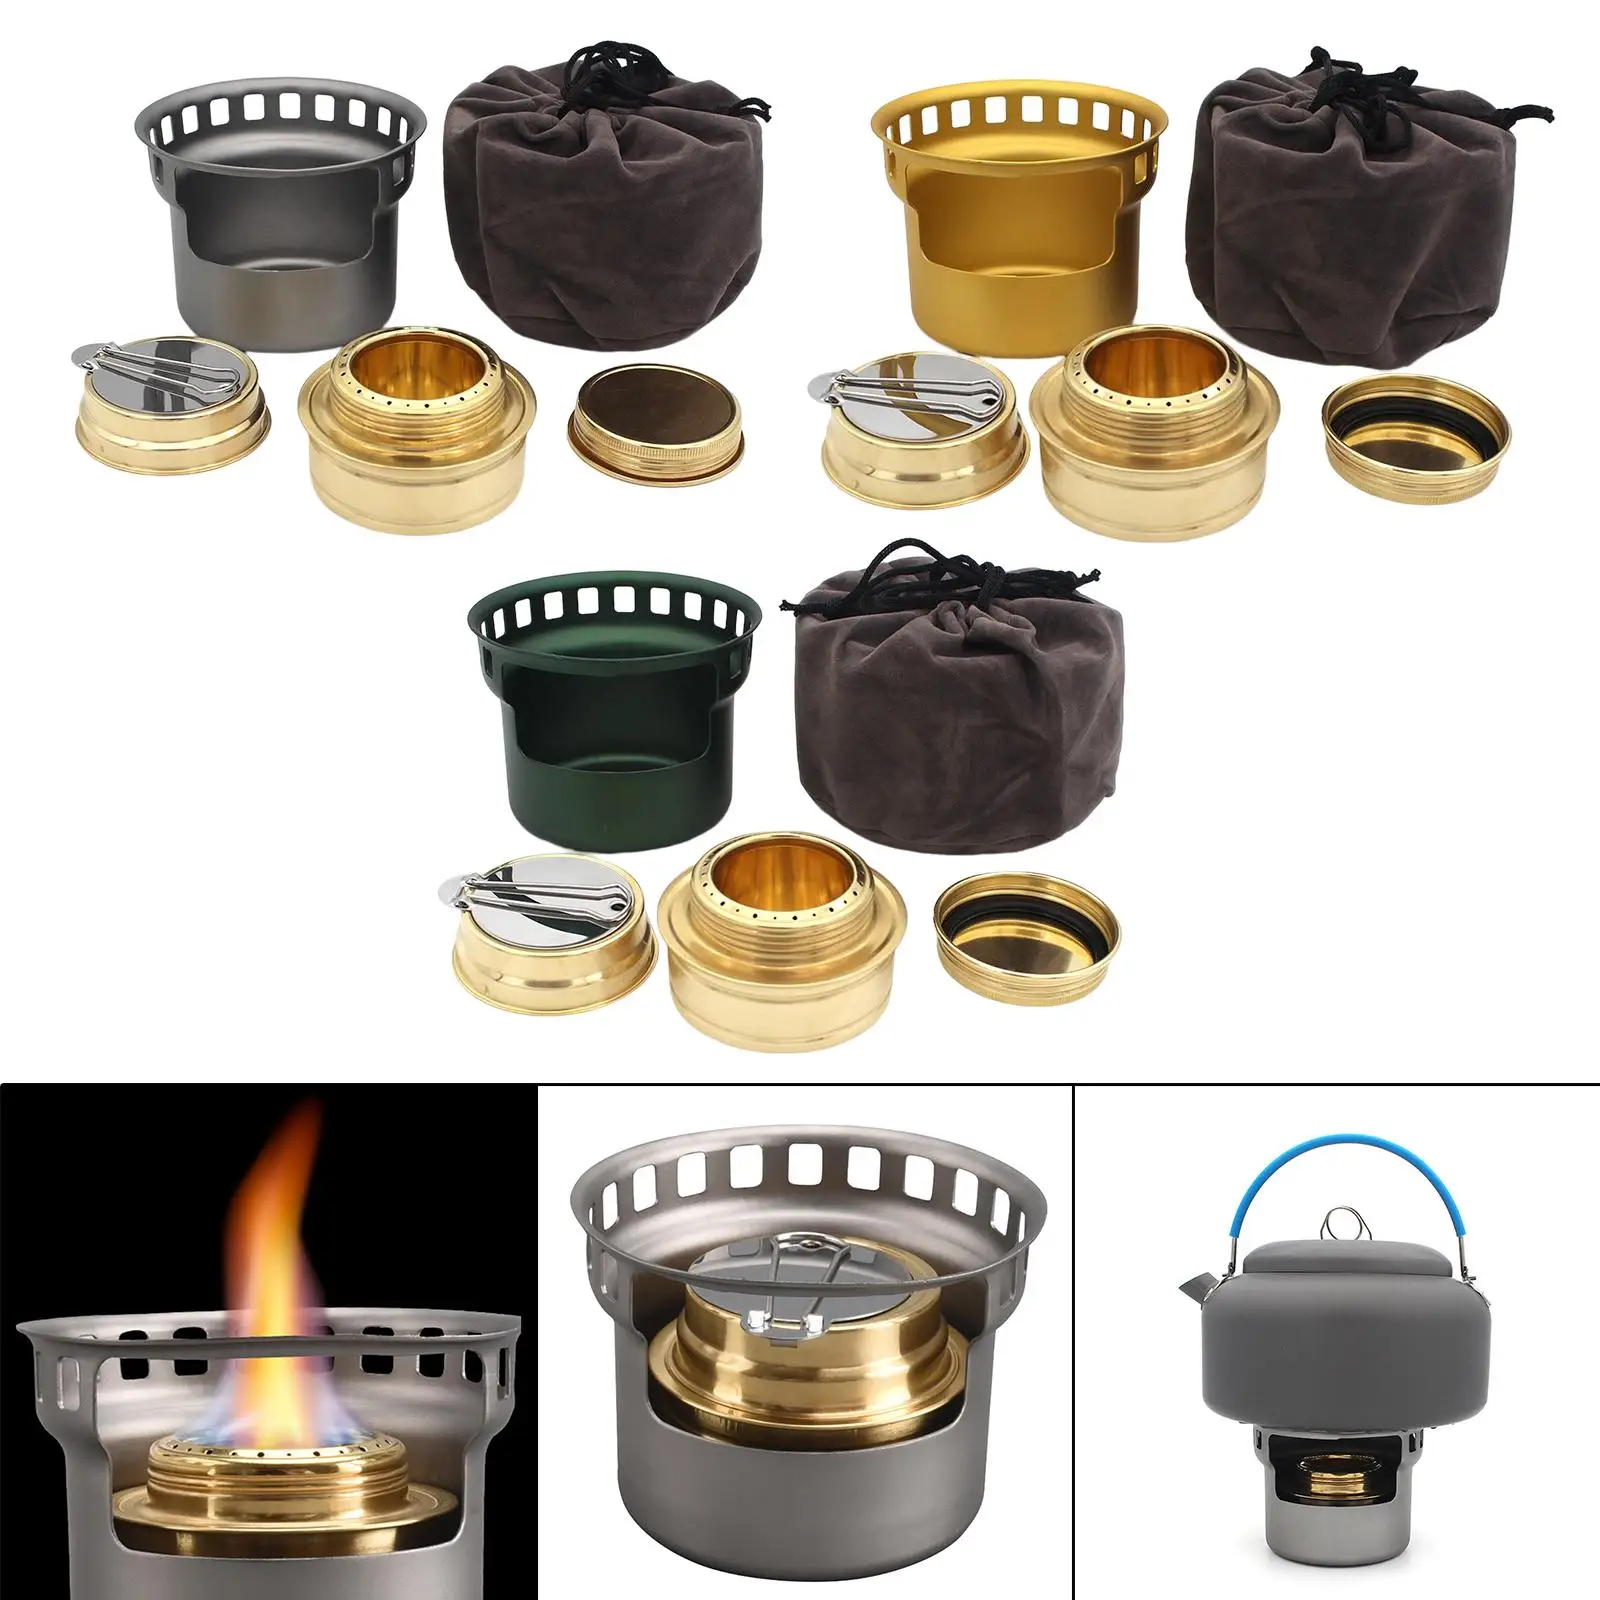 Alcohol Burner with Bag Detachable Multifunctional for Camping Picnic